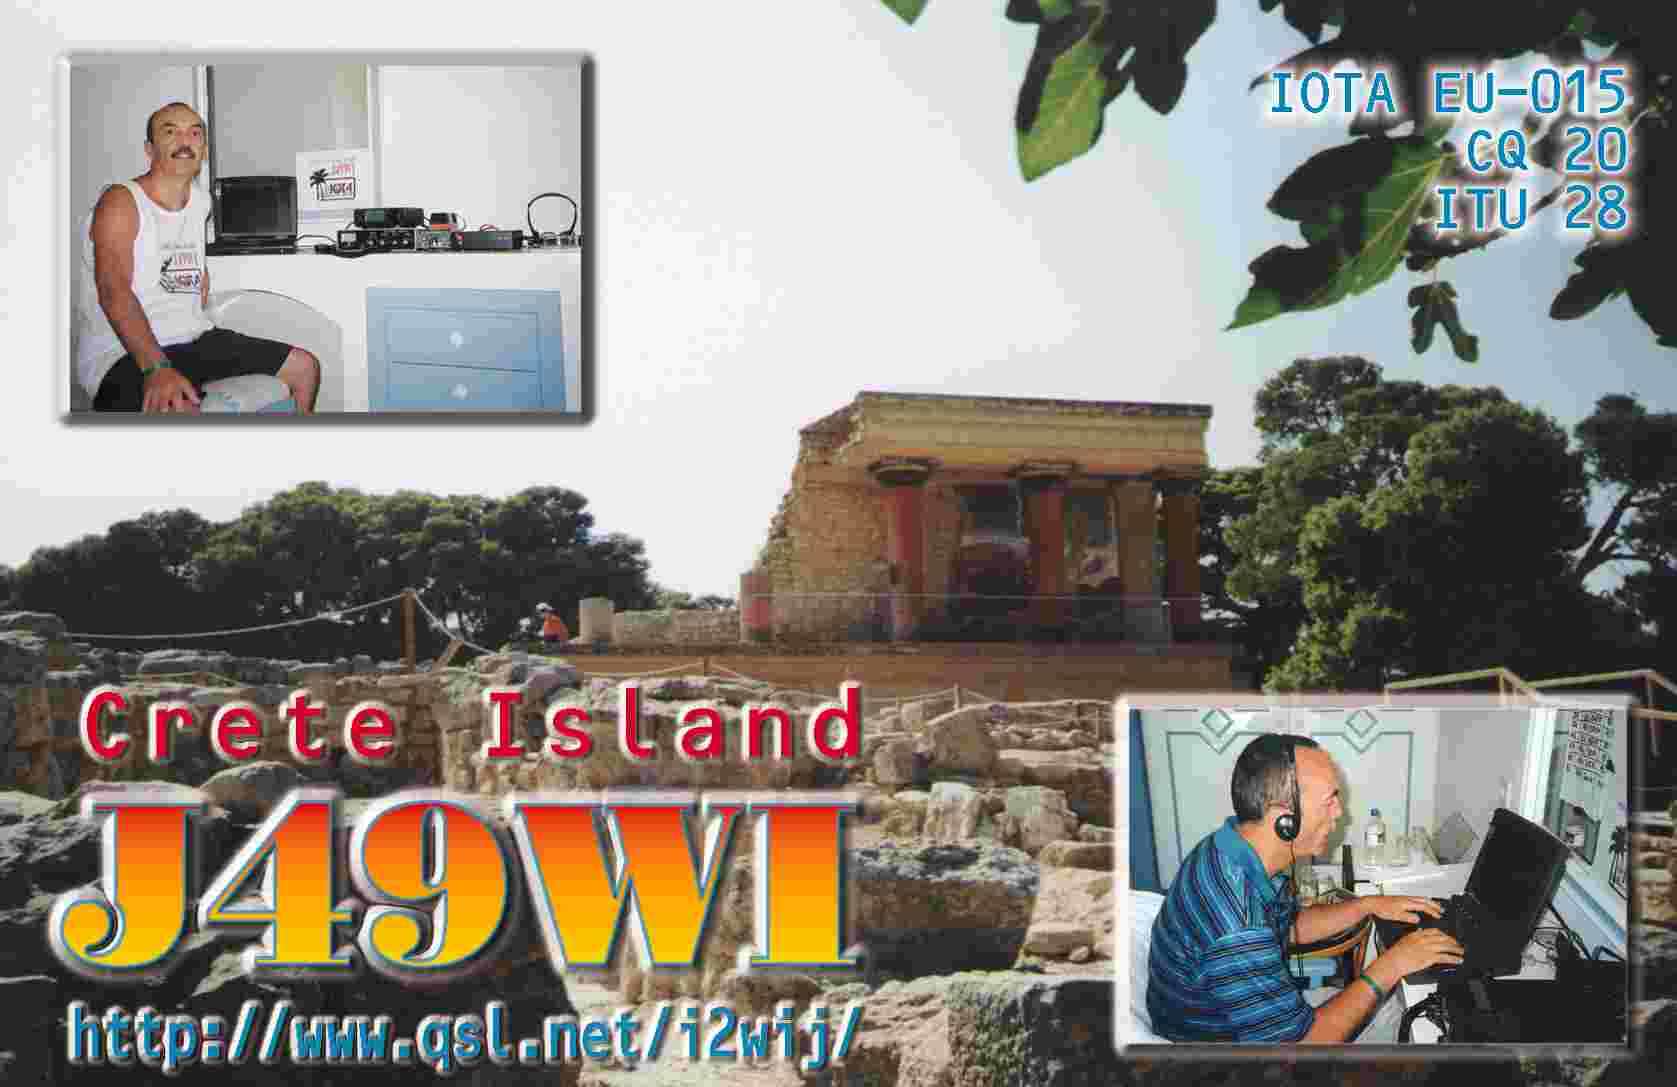 J49WI qsl-front